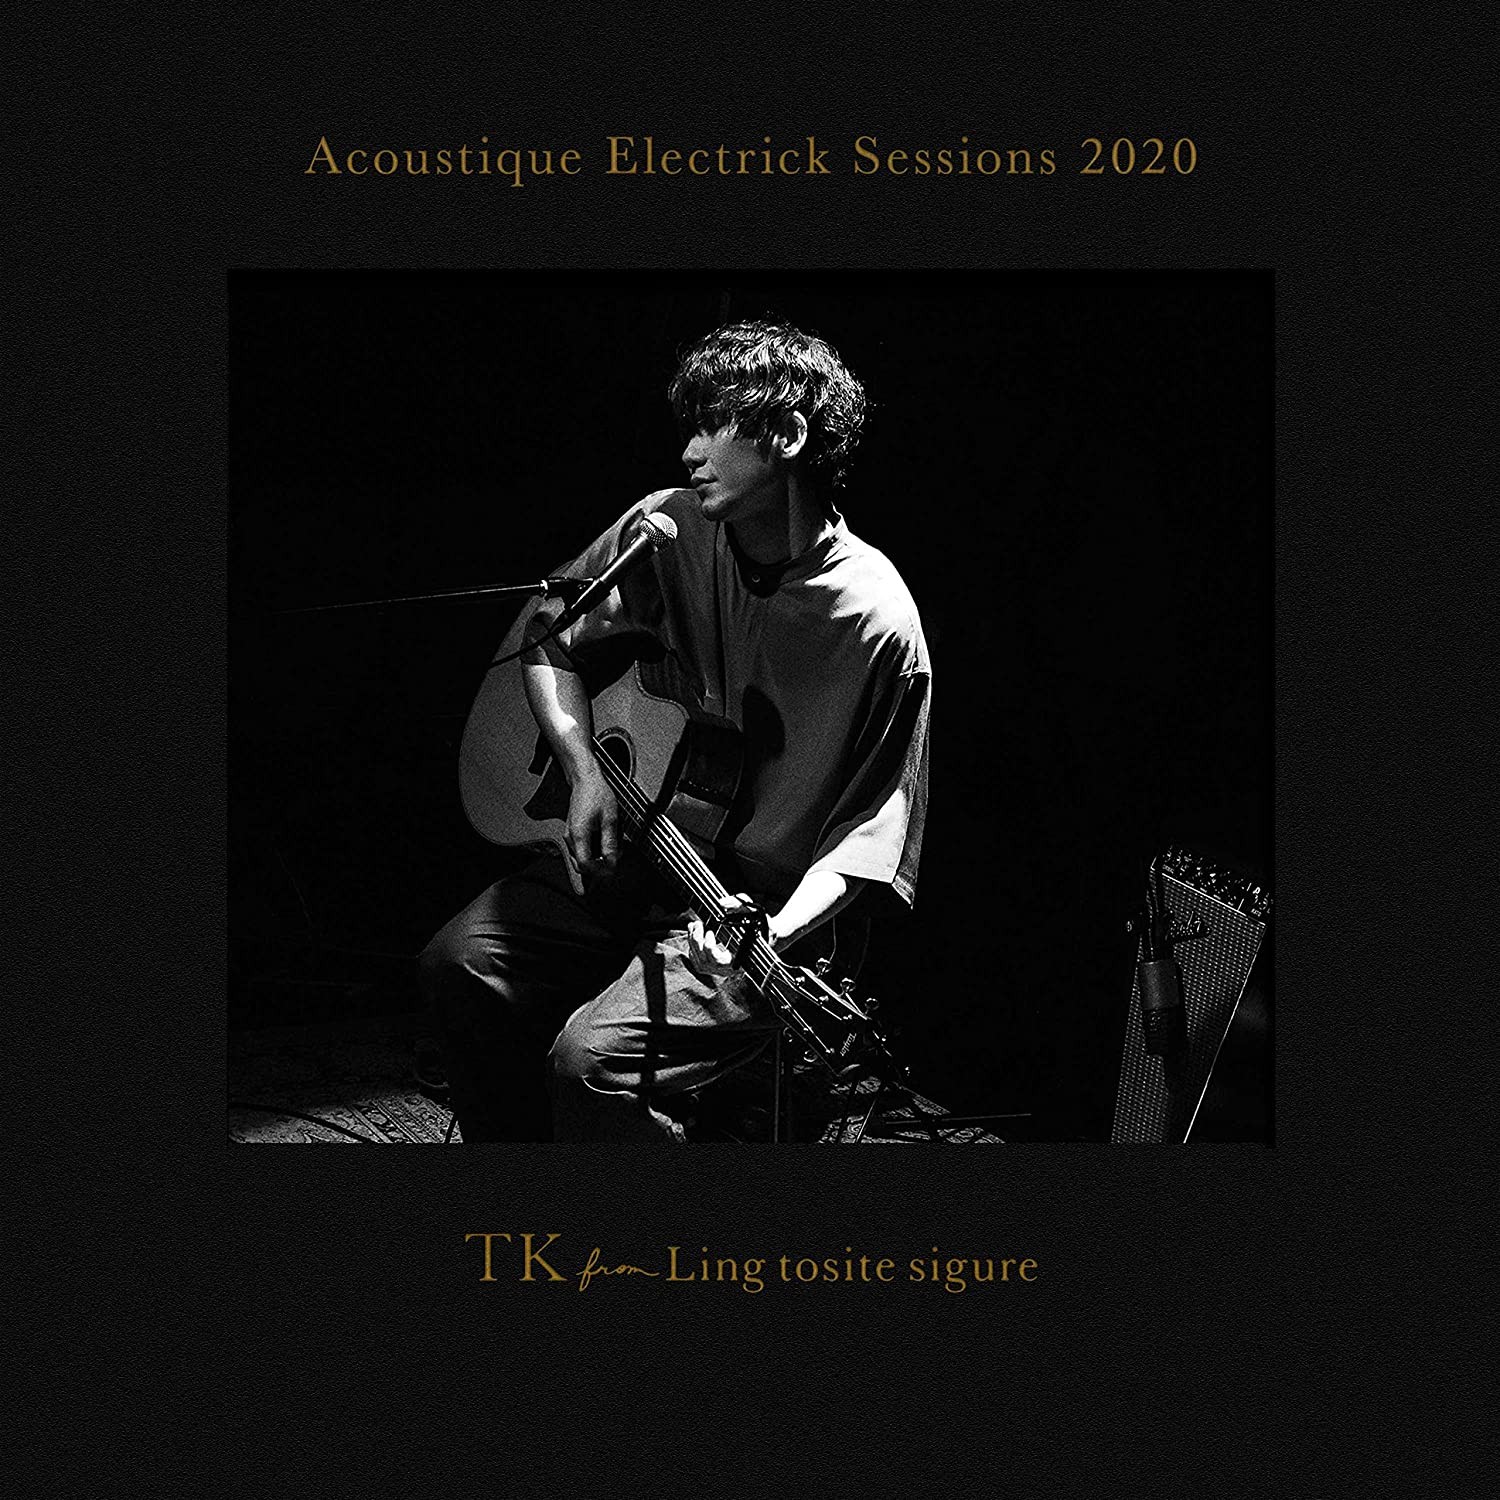 TK from 凛として時雨 (TK from Ling tosite sigure) – Acoustique Electrick Sessions 2020 [CD FLAC + Blu-ray ISO] [2021.04.14]